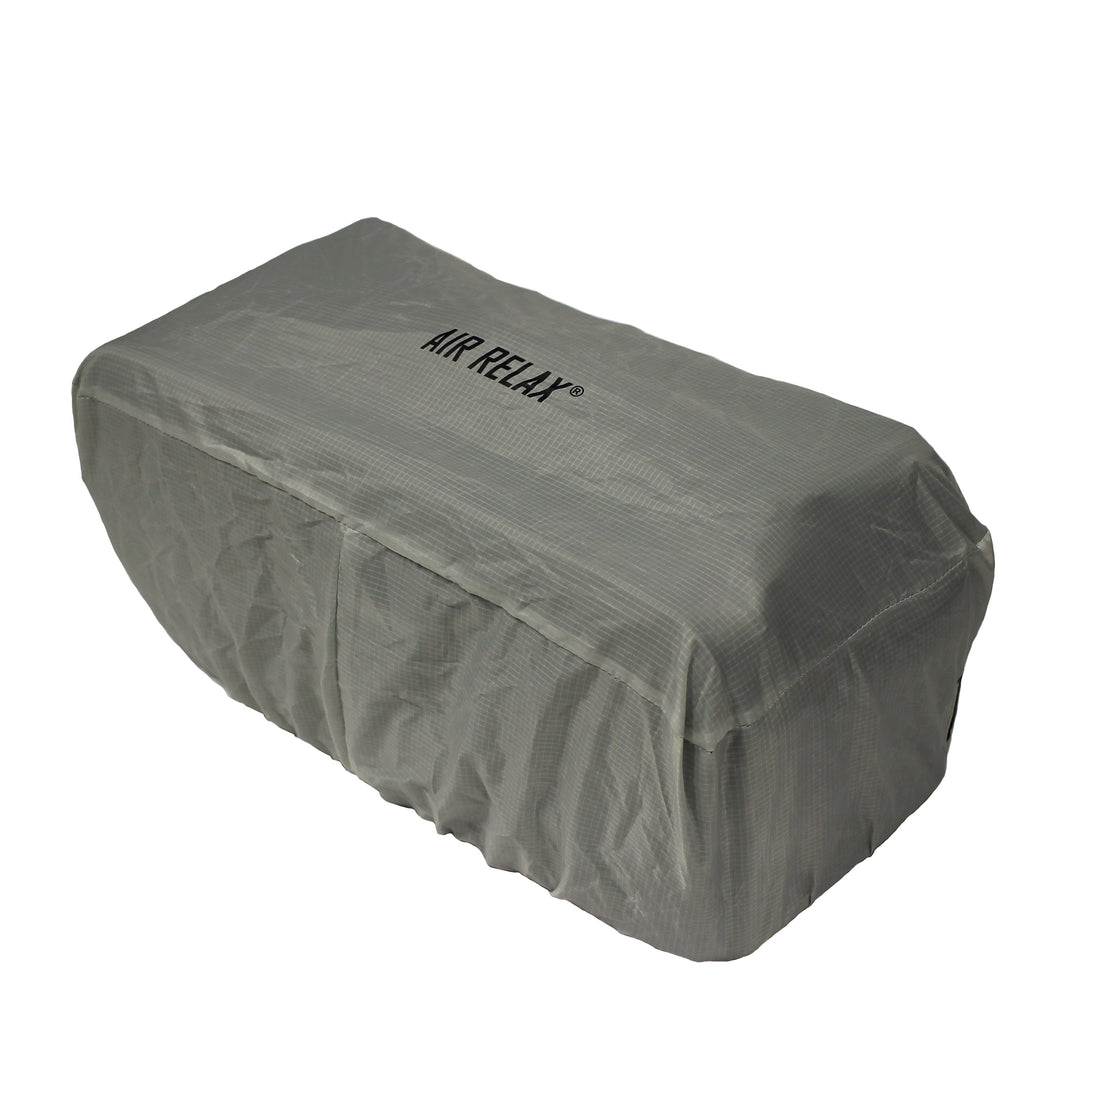 Triathlon Tips: Air Relax Travel Carrying Case For Recovery